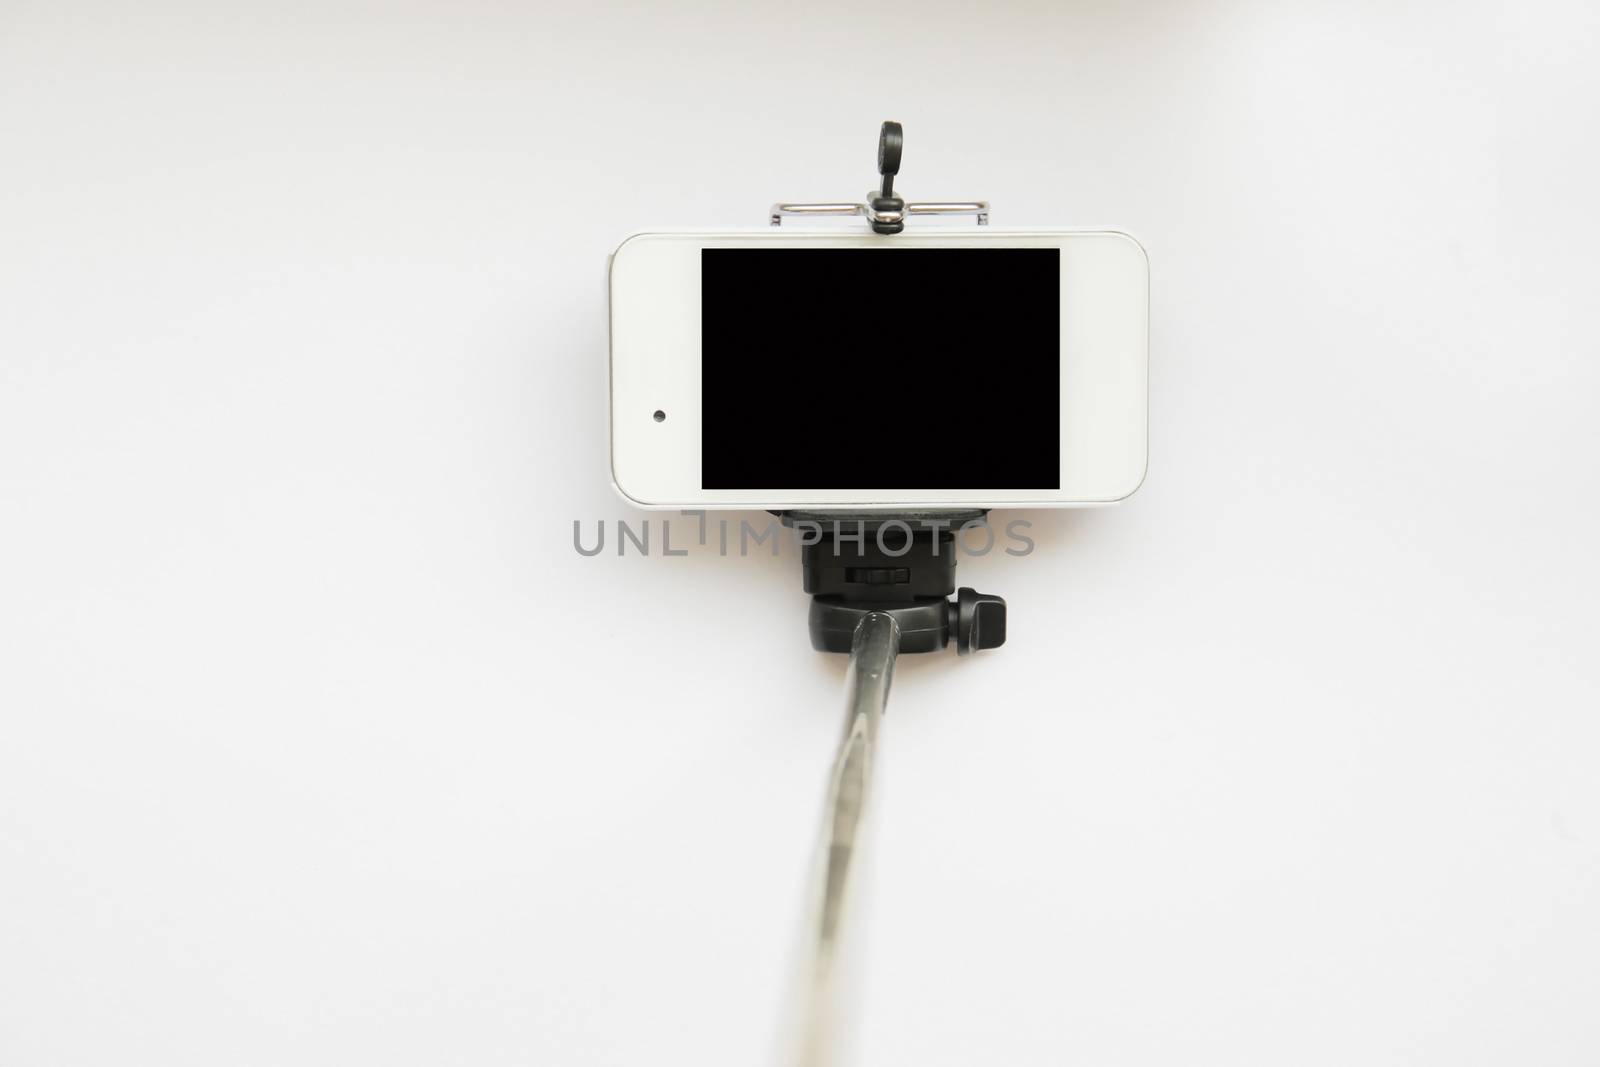 Selfie stick for smartphone by Voinakh